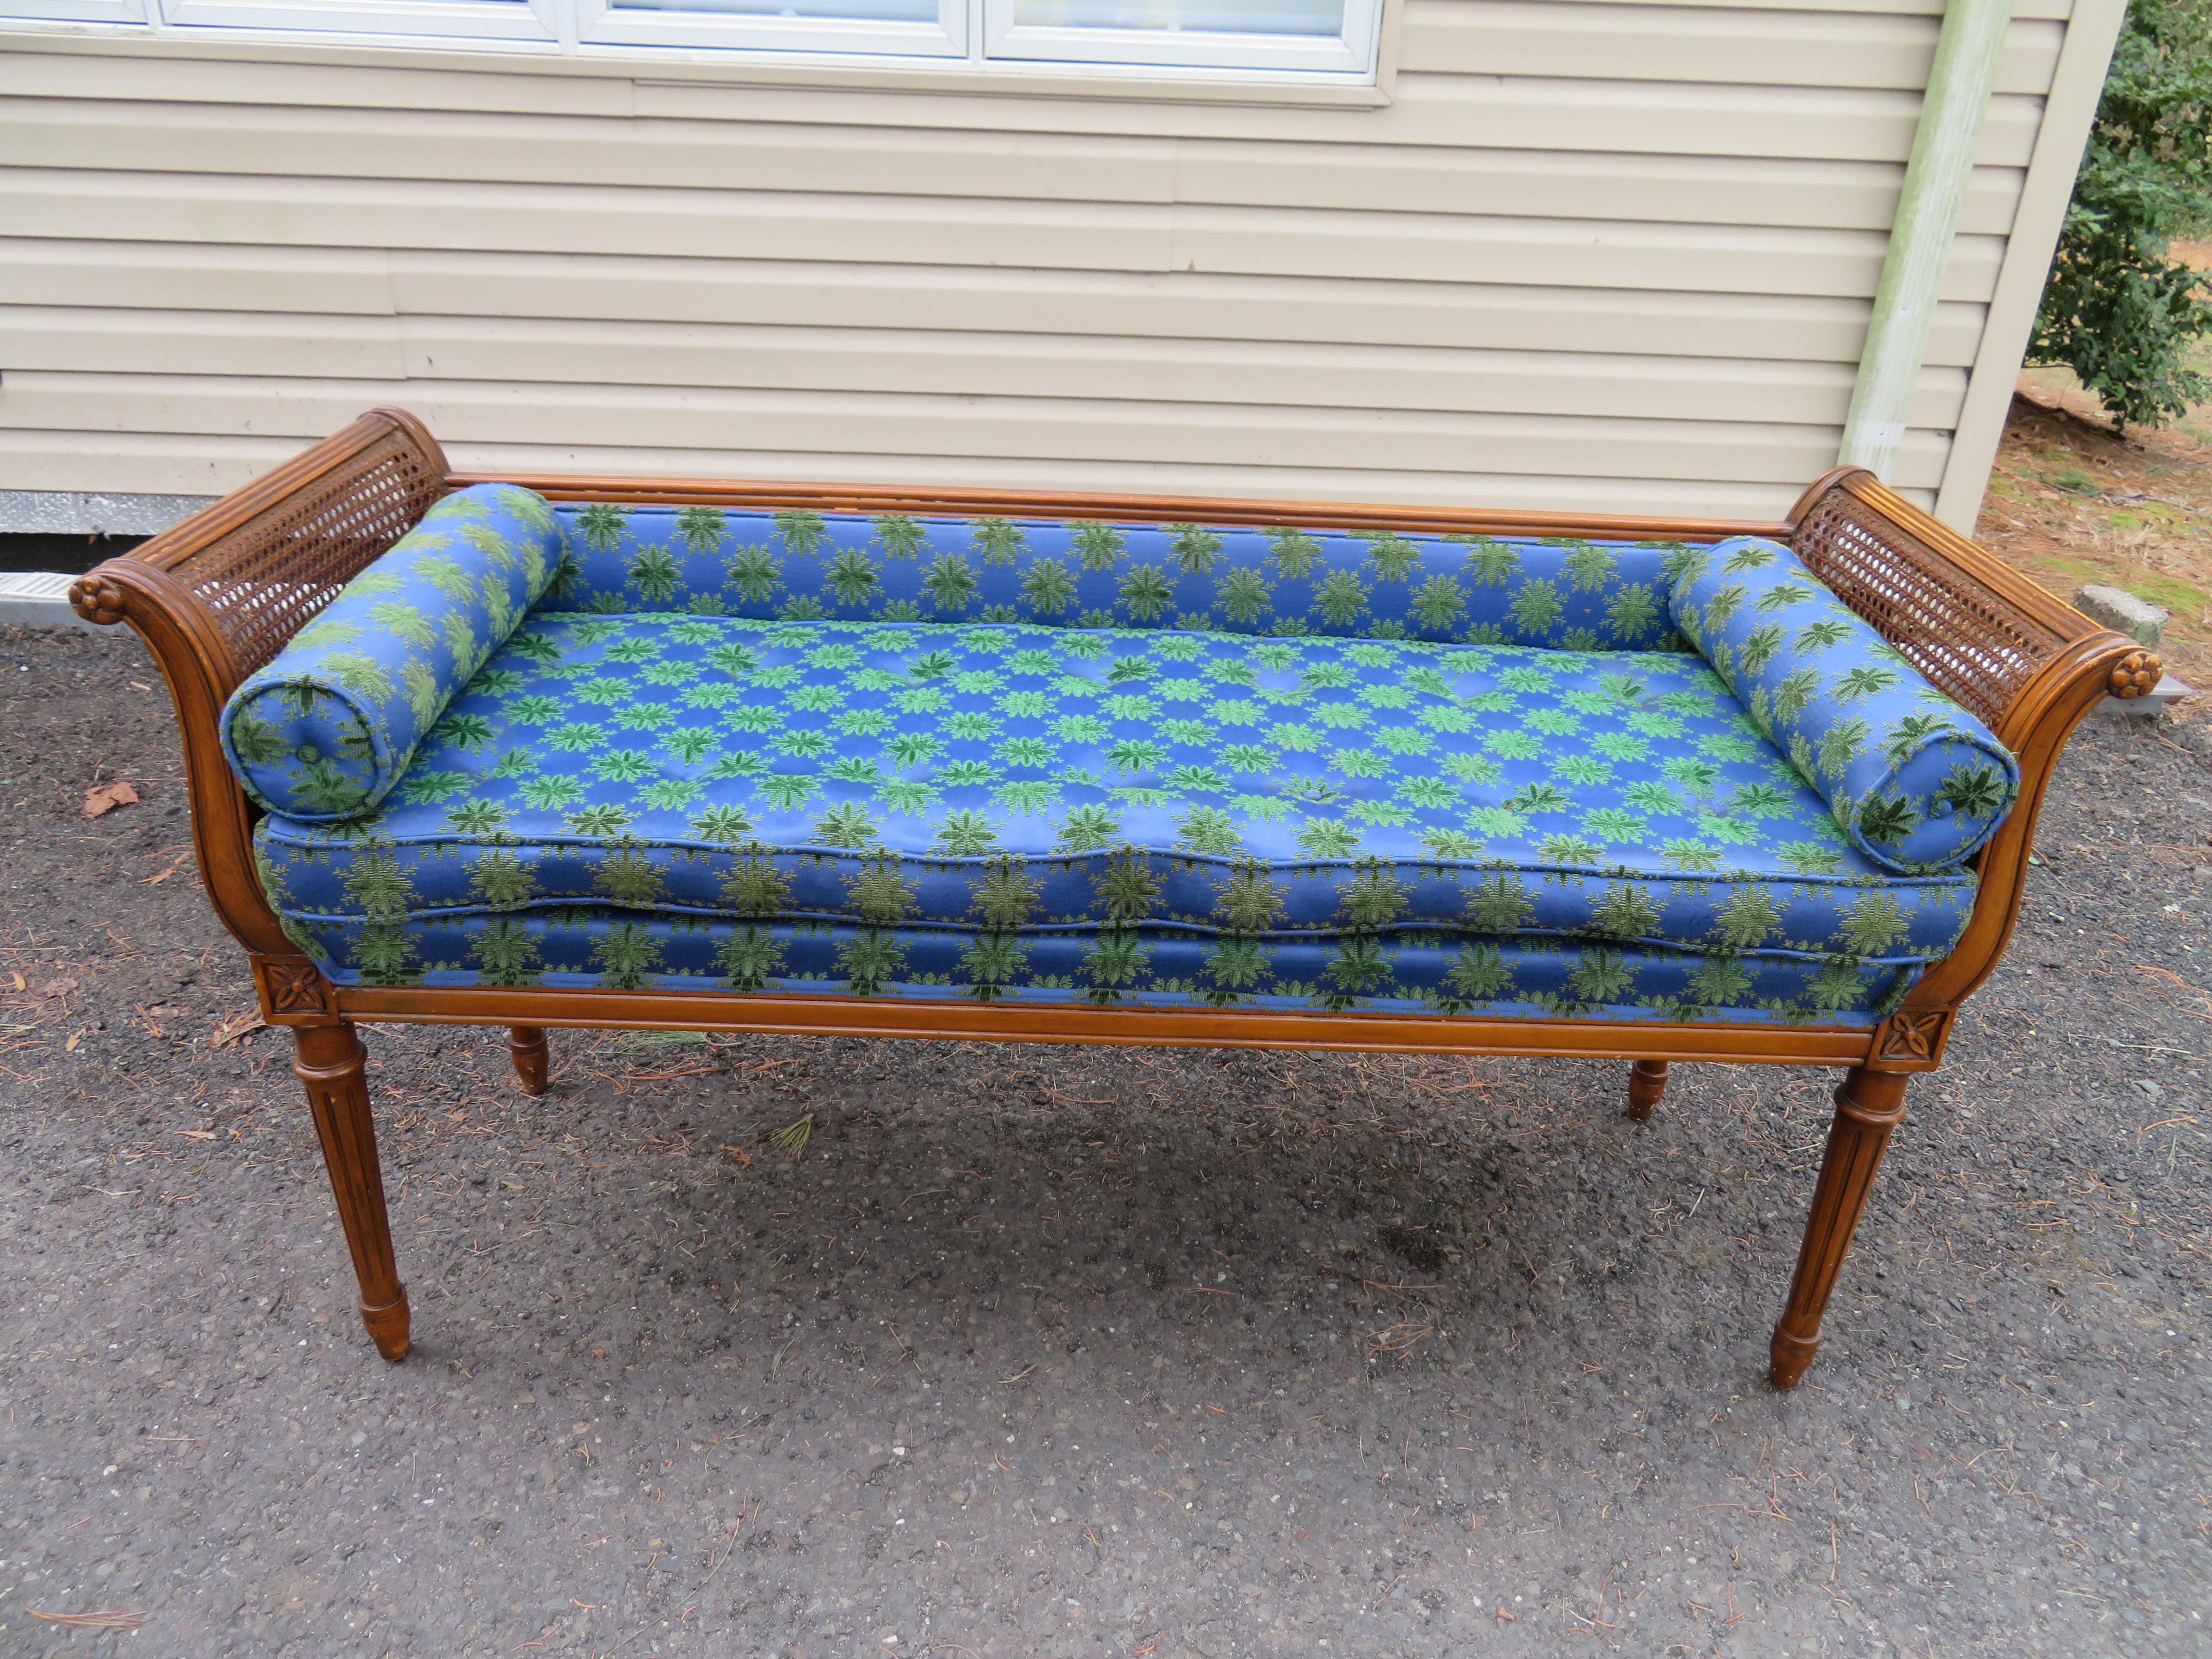 Wonderful Hollywood Regency neoclassical style caned arm upholstered bench. The upholstery will need to be replaced but that's what you designers are looking for anyway, Right?